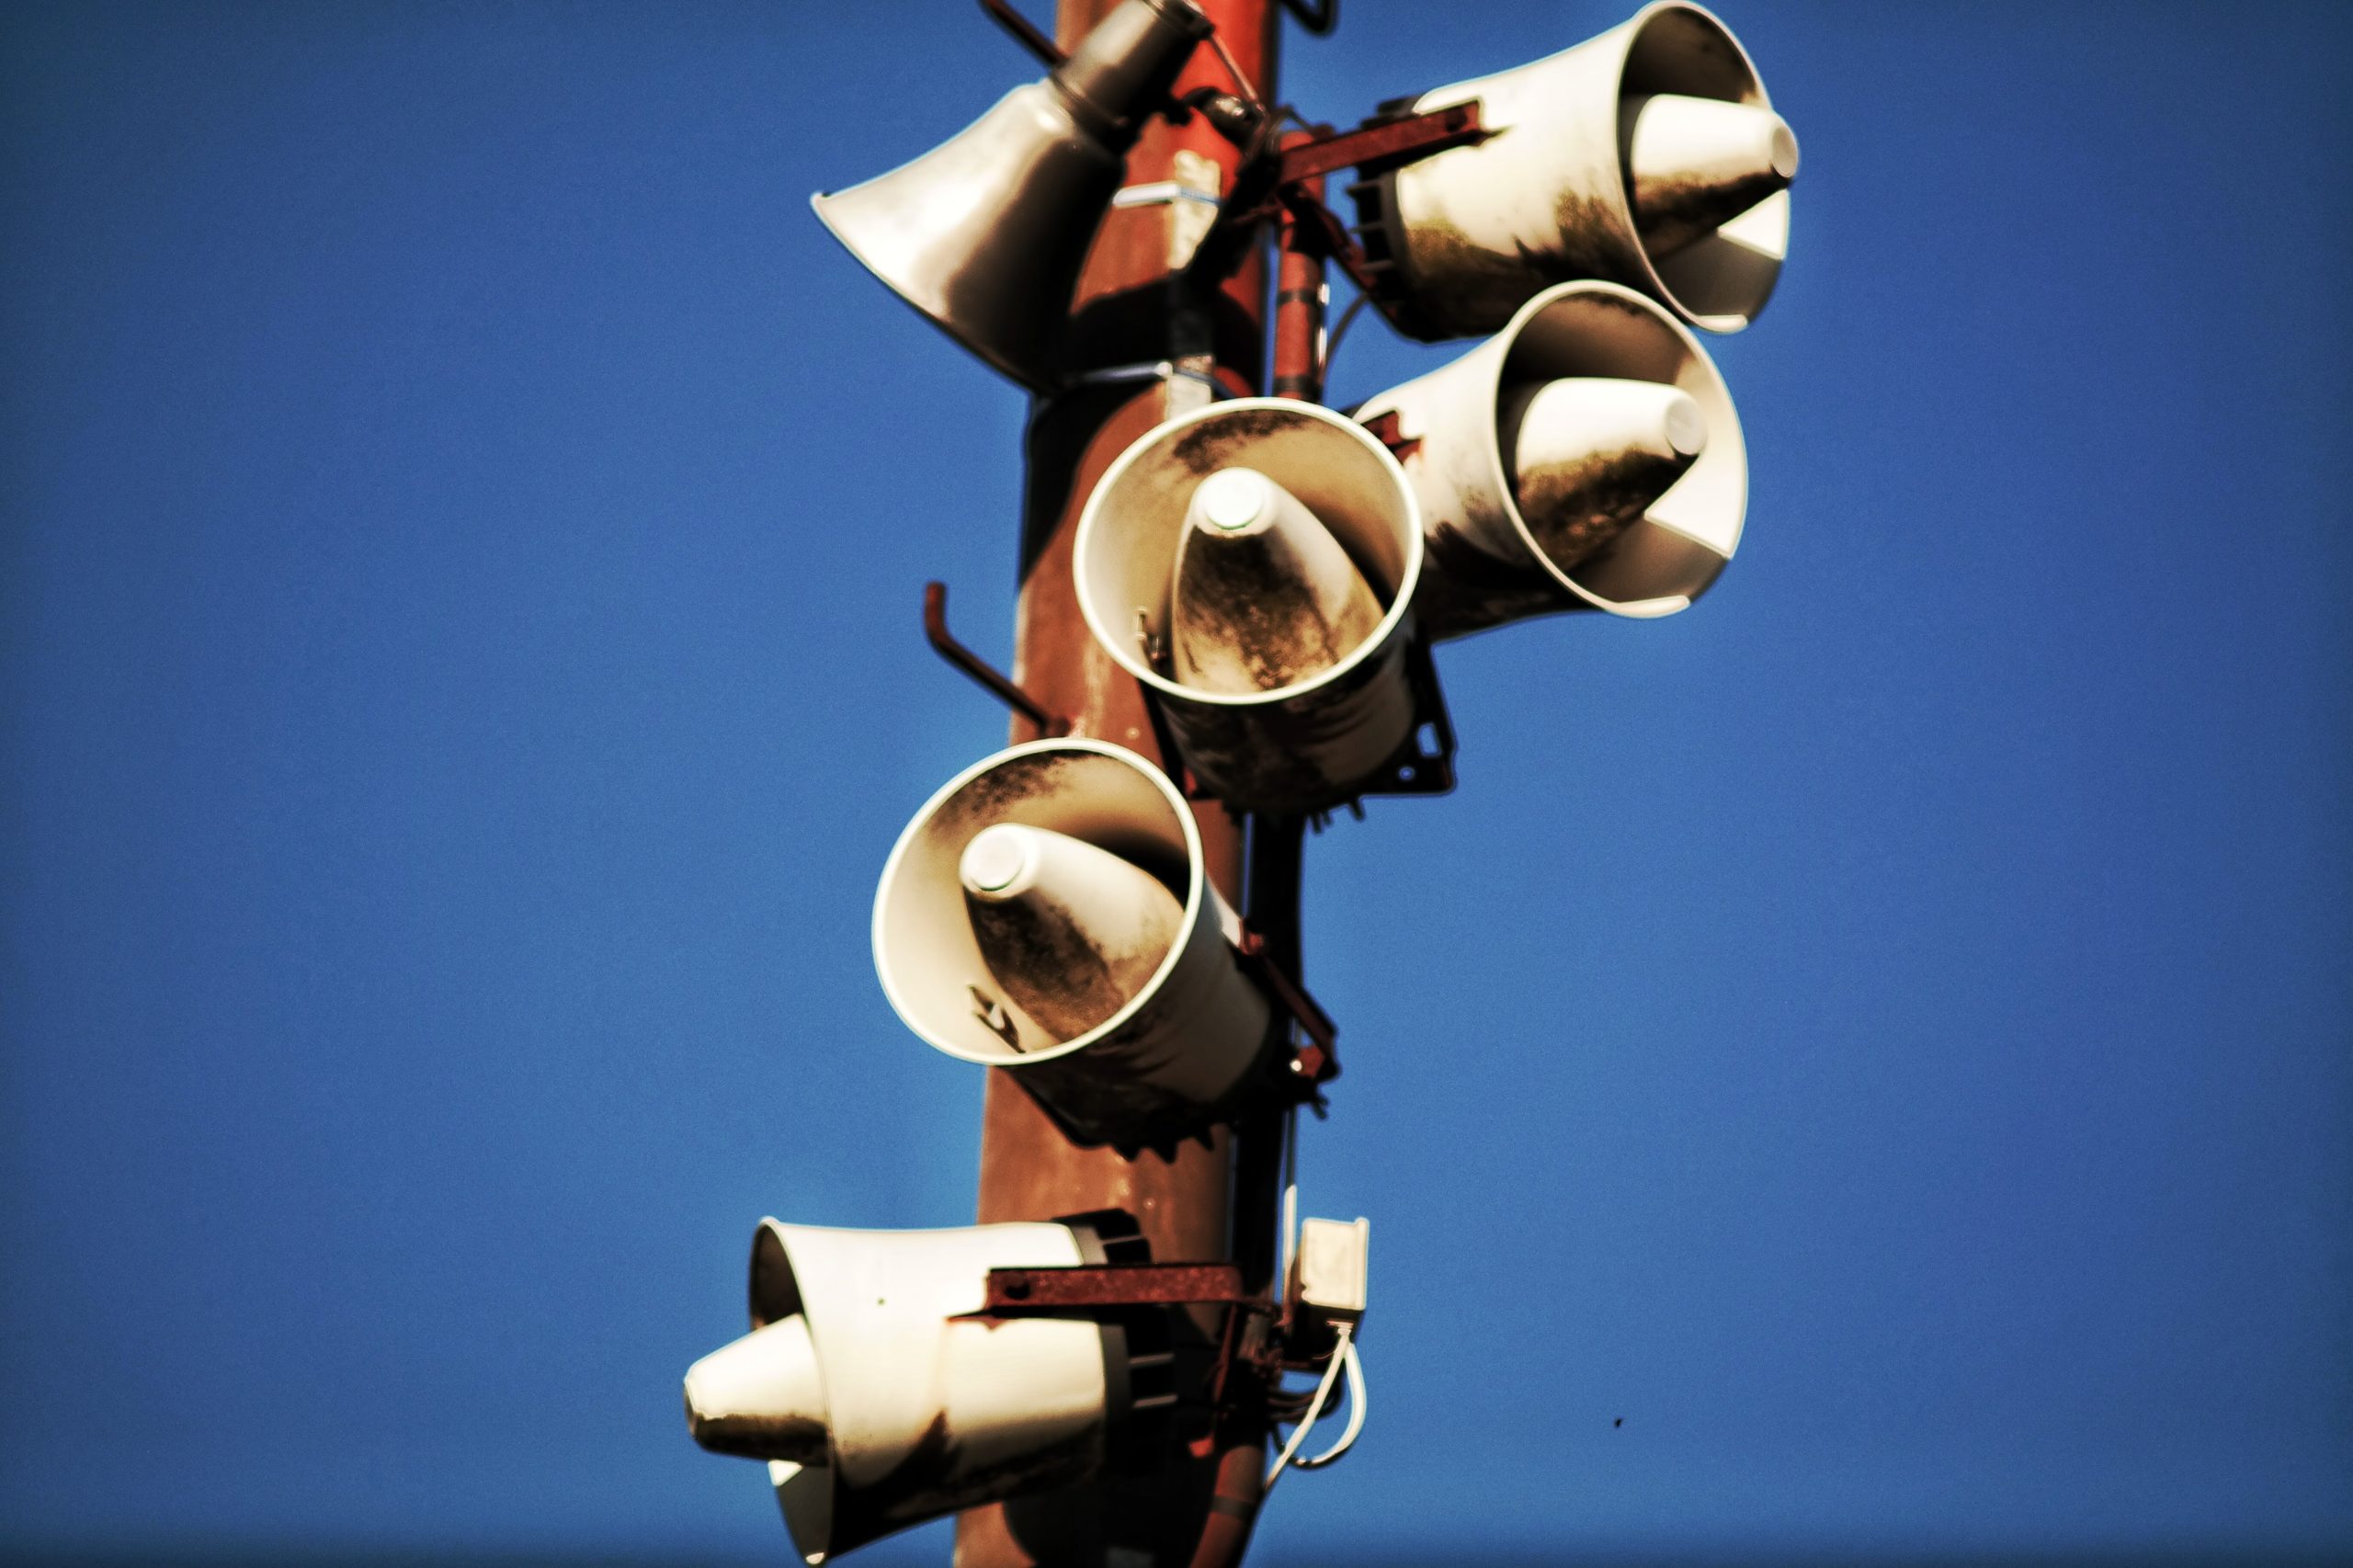 Loudspeakers attached to a pole against a blue sky. Photo by Jens Mahnke from Pexels